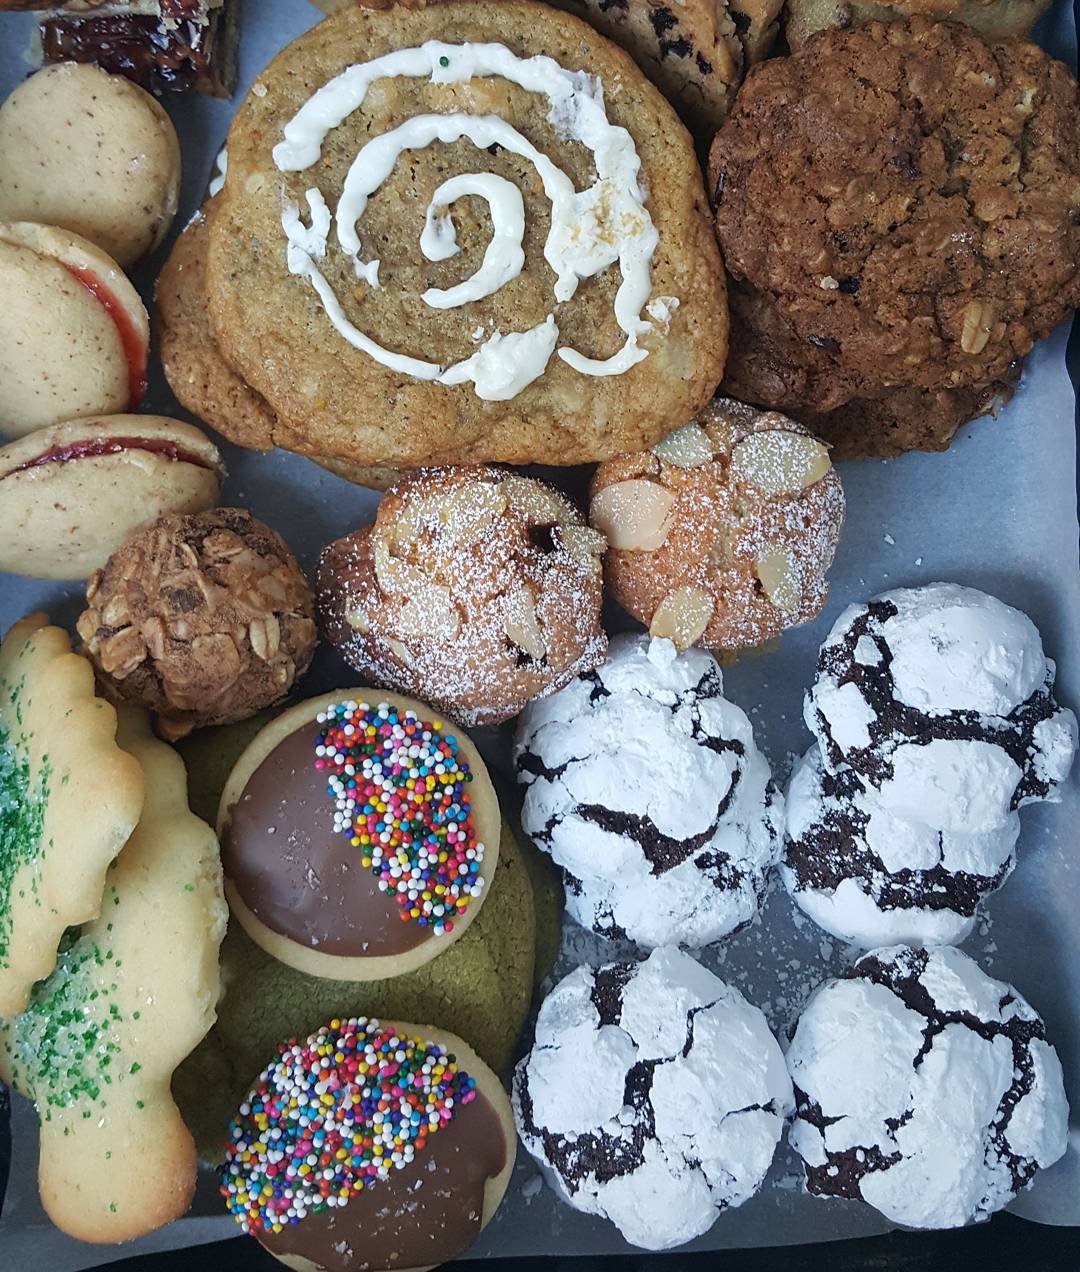 Different Styles of Christmas Cookies, Muffins, and Other Treats. Photo by Instagram user @jessicalittlefu